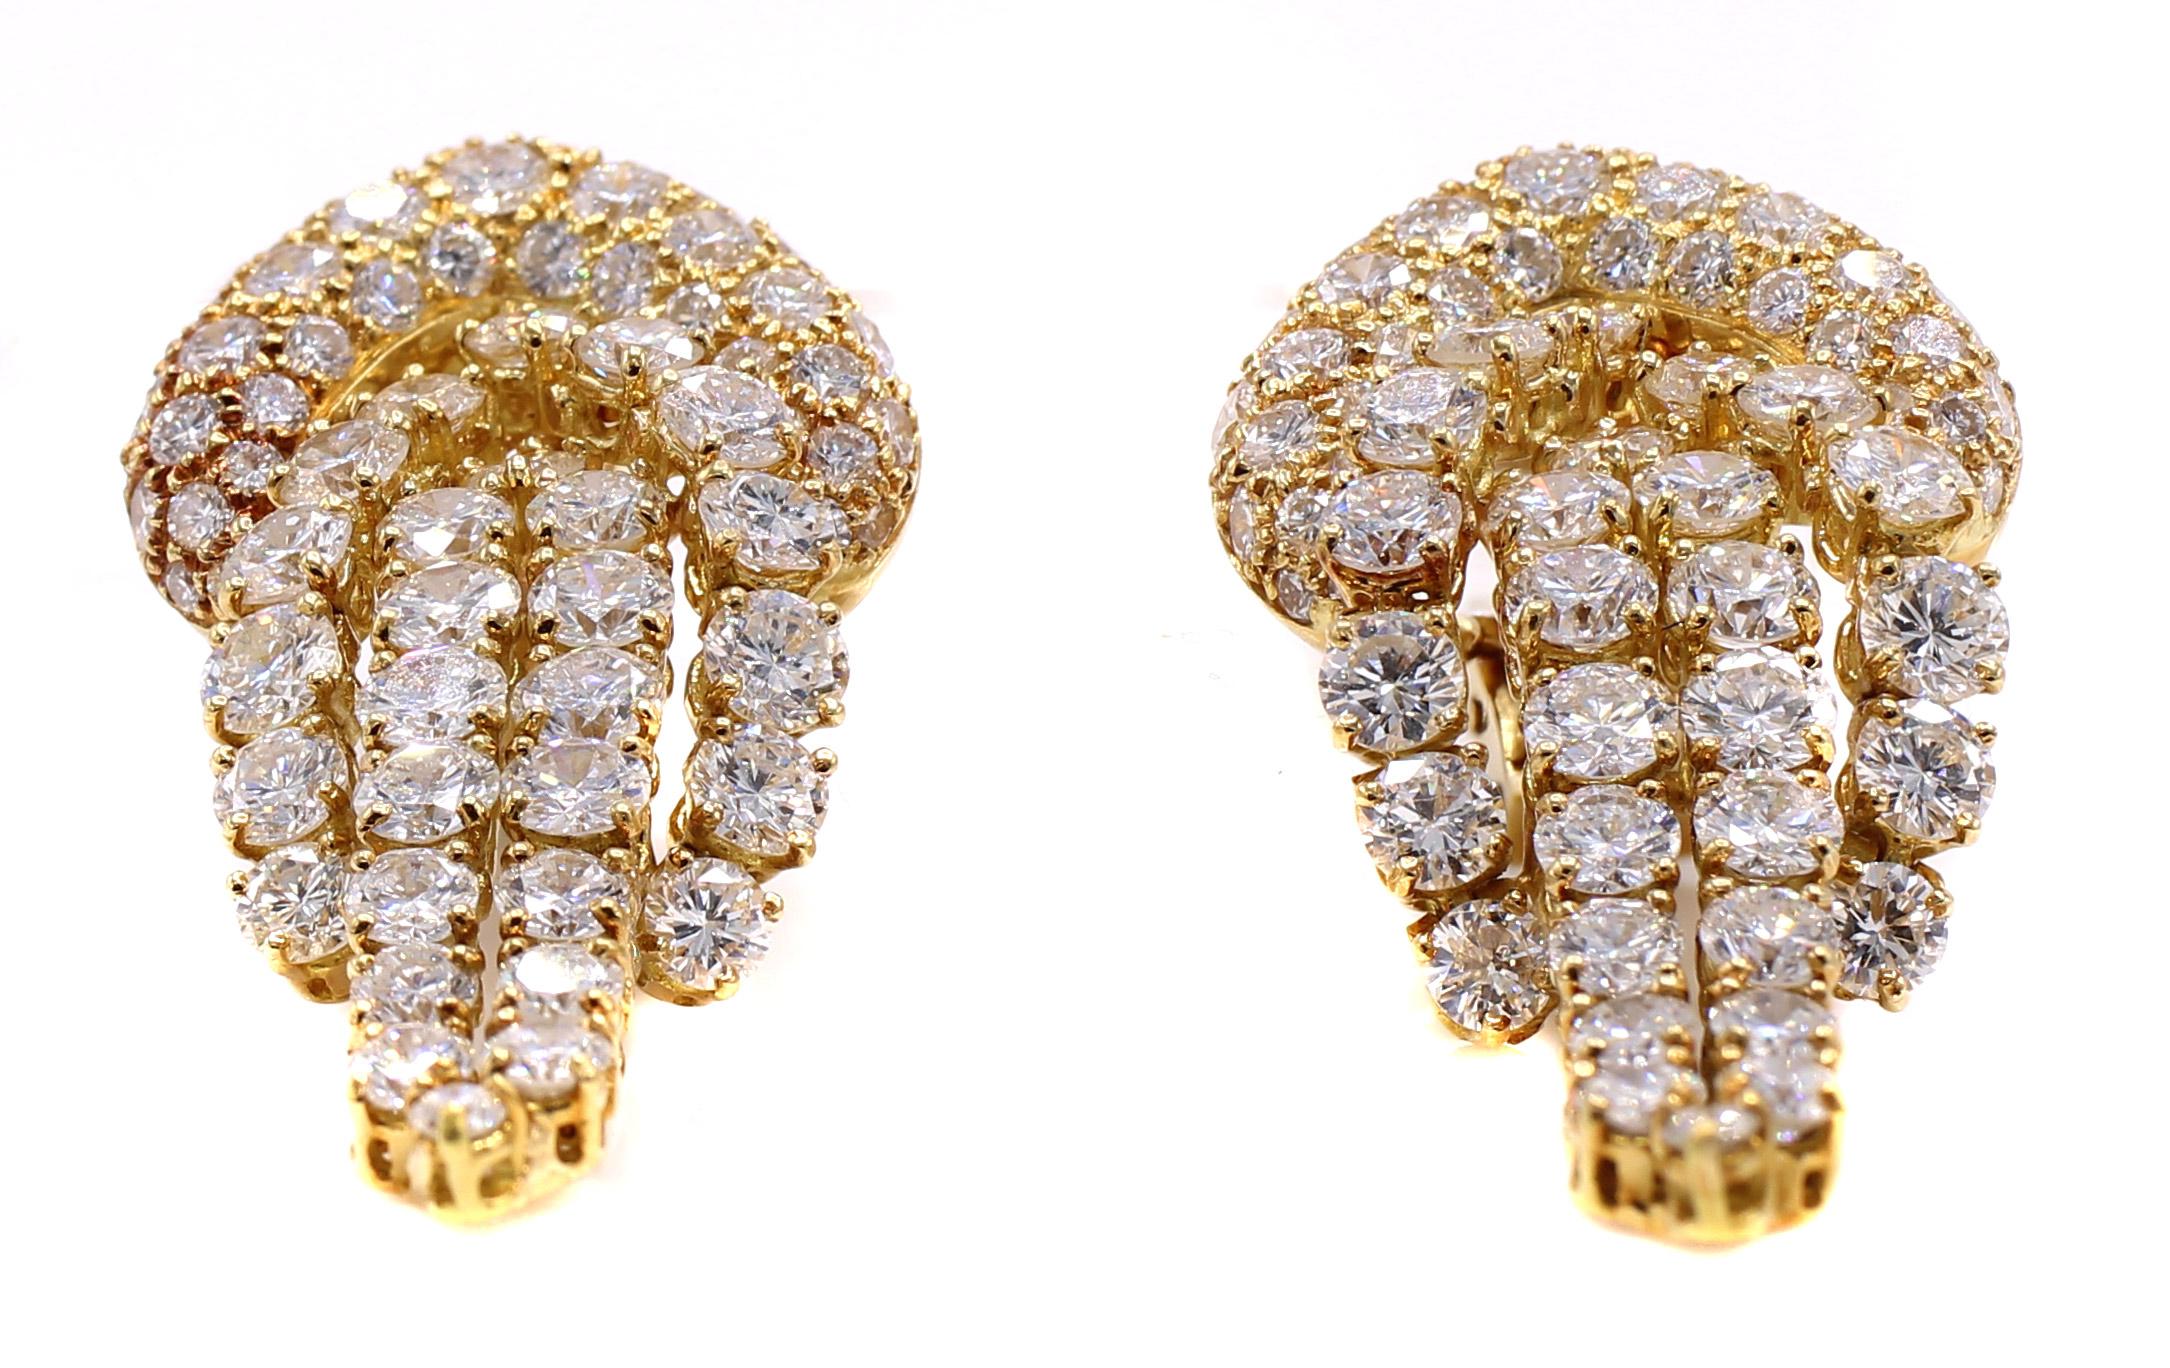 Beautifully designed and masterfully handcrafted in 18 karat yellow gold, these chic 1970s French diamond ear clips come to life with sparkle on the ear. 130 perfectly matched in cut, color and clarity, round brilliant cut diamonds display